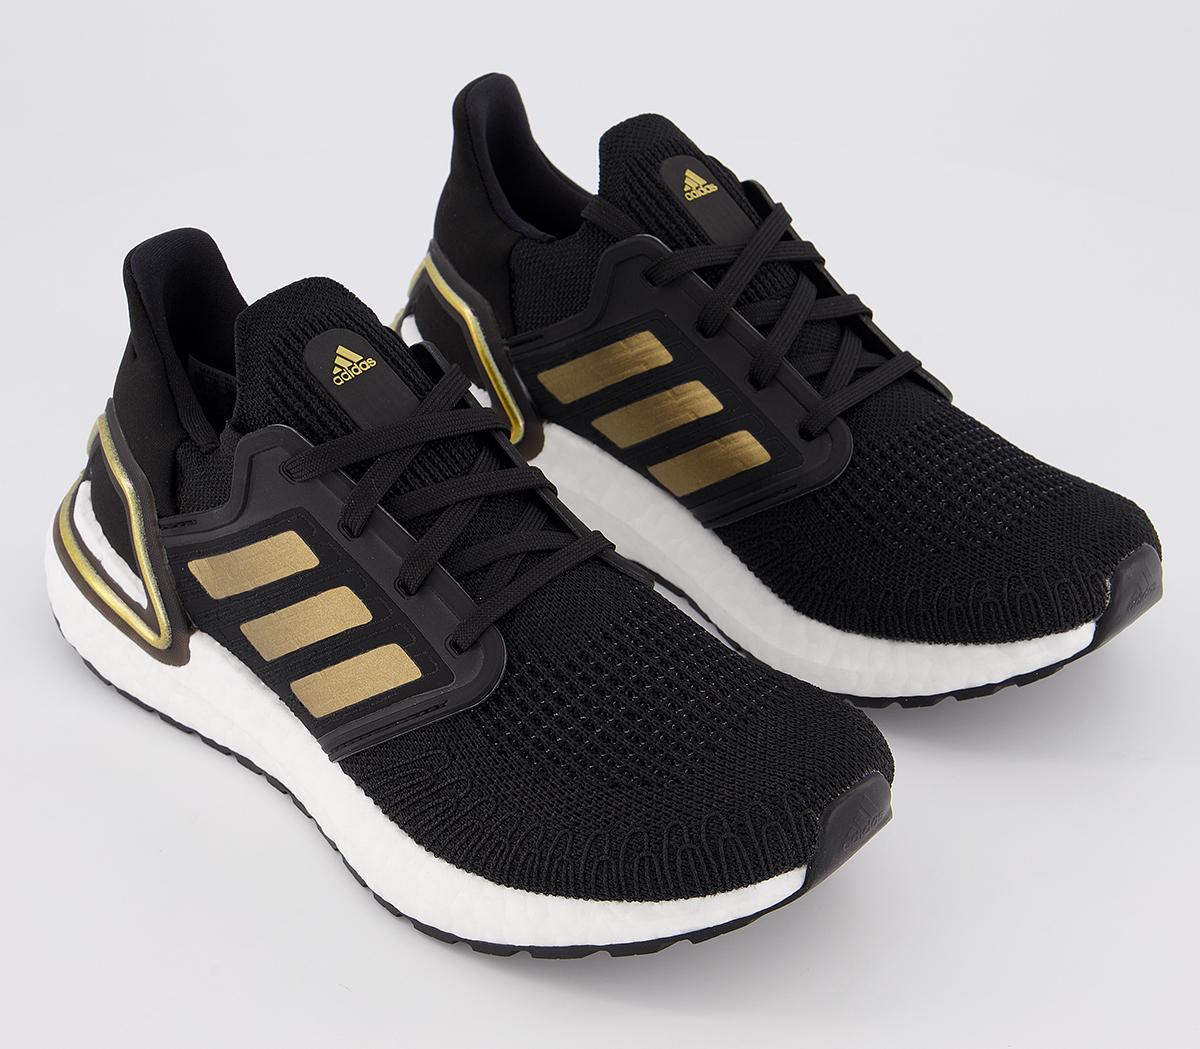 Black gold adidas trainers